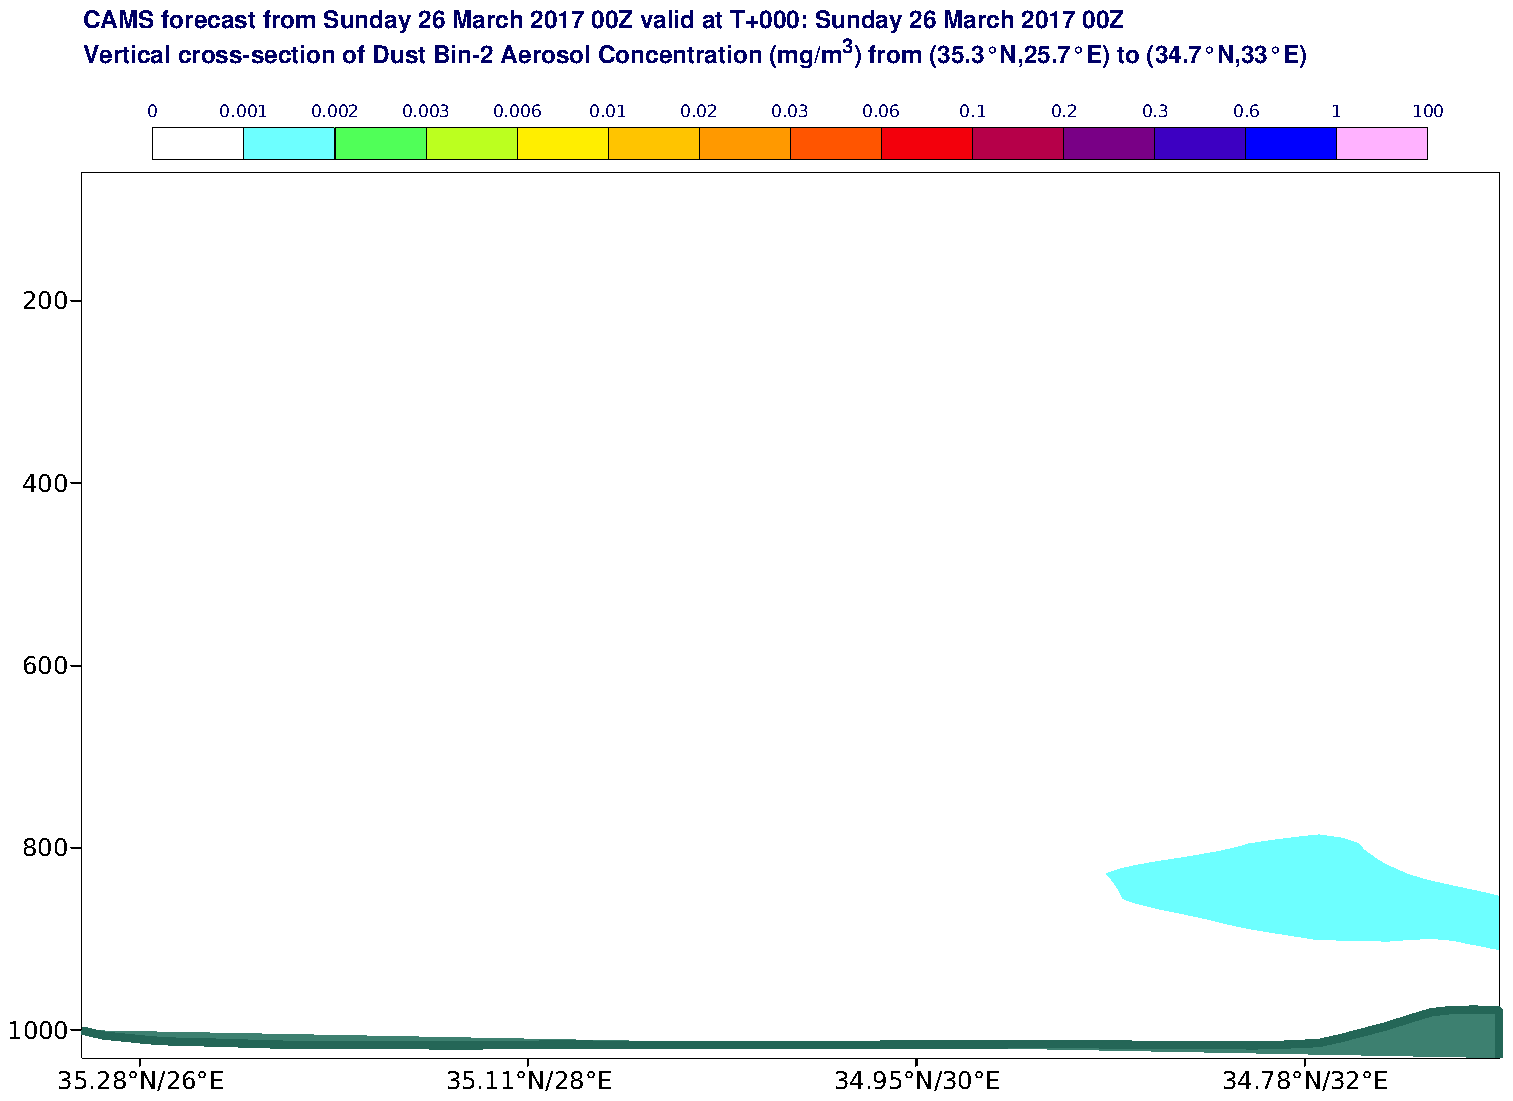 Vertical cross-section of Dust Bin-2 Aerosol Concentration (mg/m3) valid at T0 - 2017-03-26 00:00